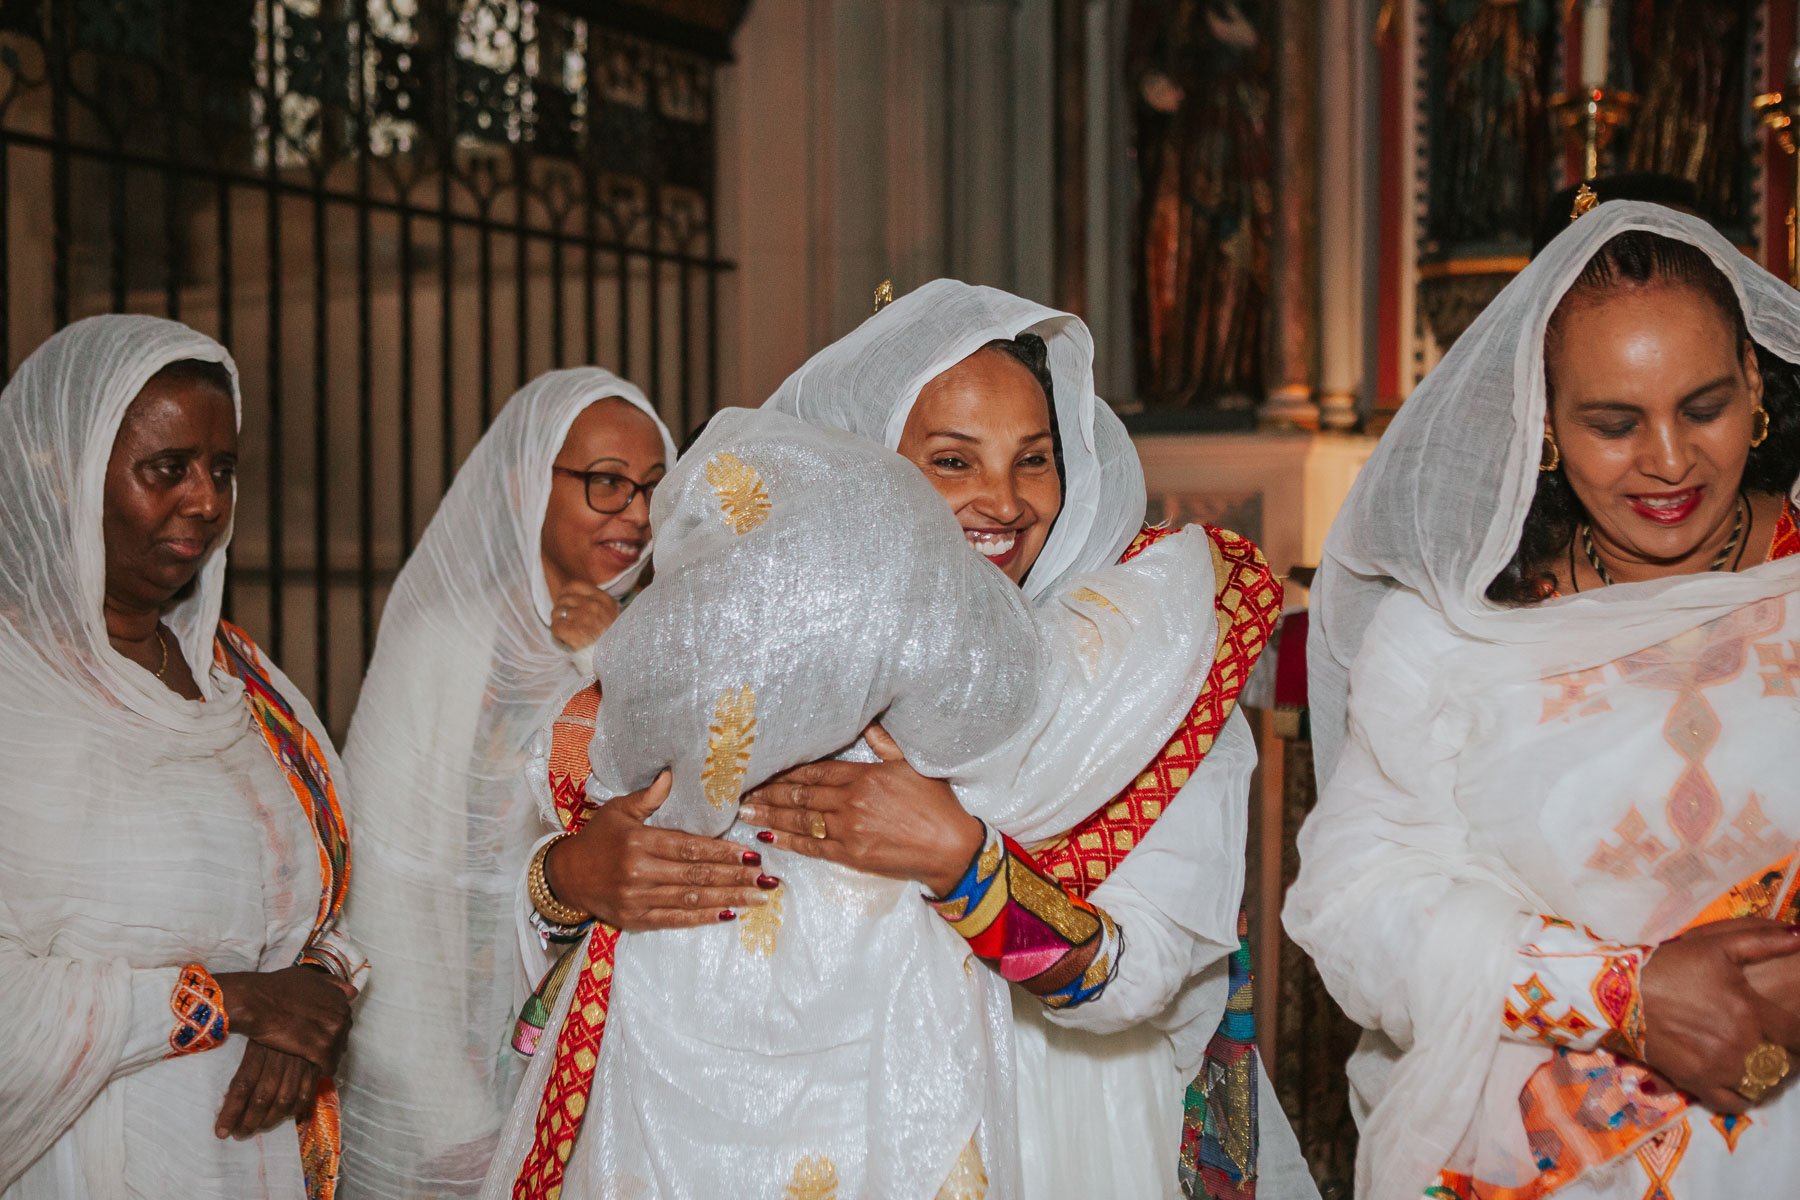 Grandmother of the baby hugs her freinds dressed in traditional Eritrean dress.